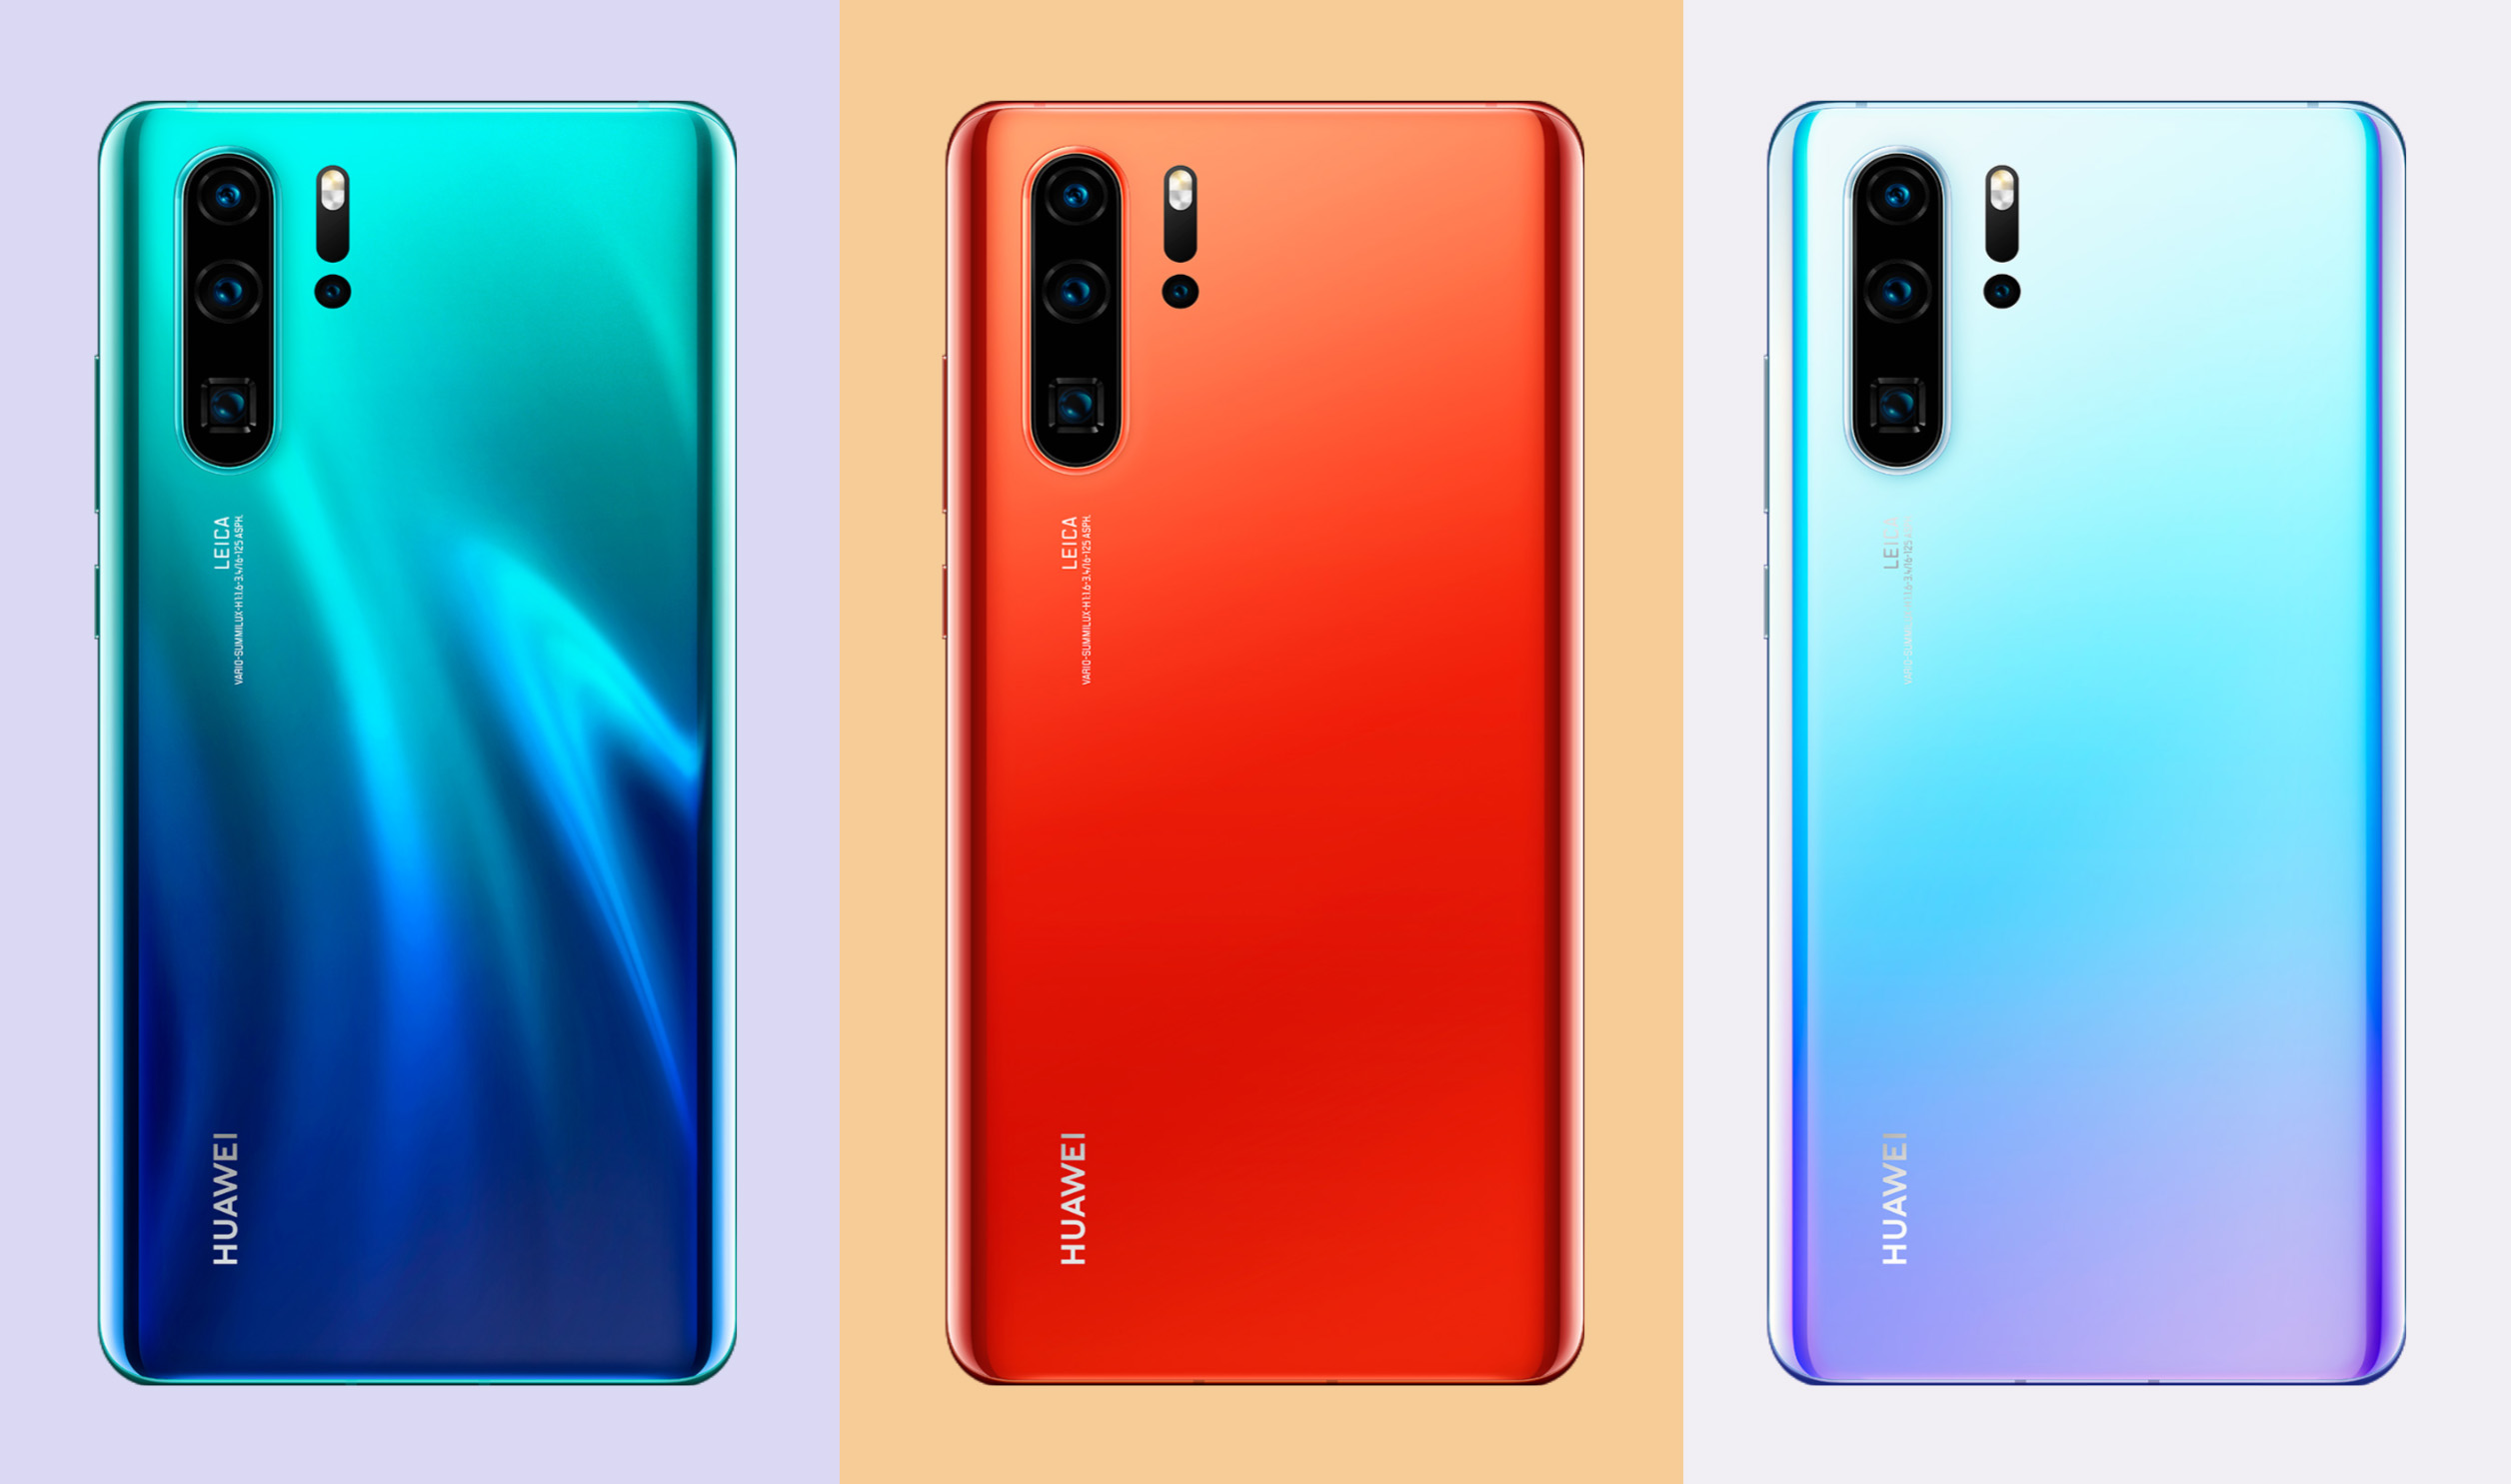 Huawei P30 Lite Is A More Affordable Alternative To The P30